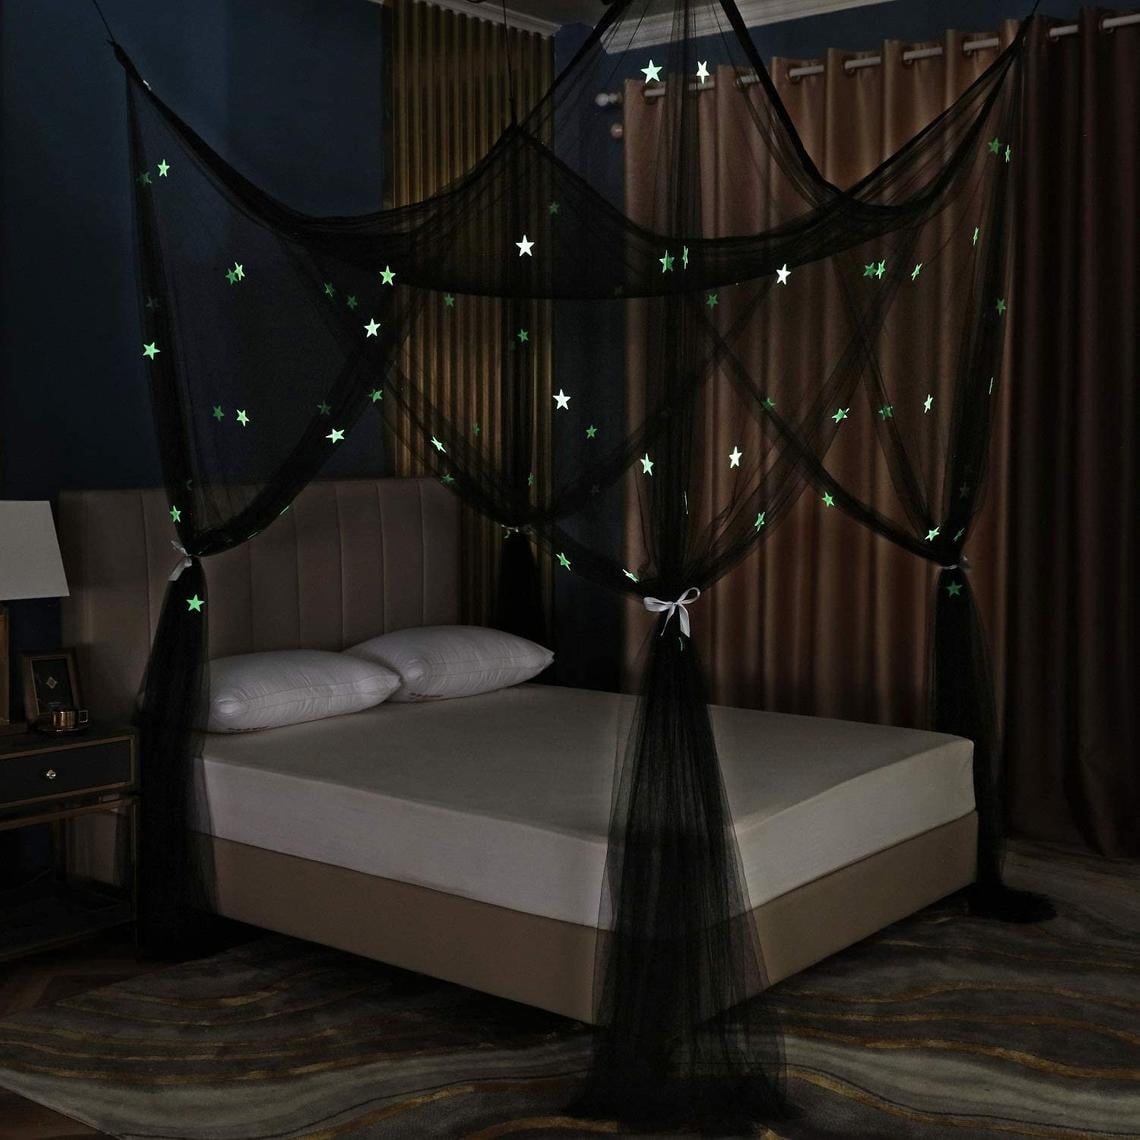 Black 4 Poster Glow In The Dark Bed, Canopy Bed Covers King